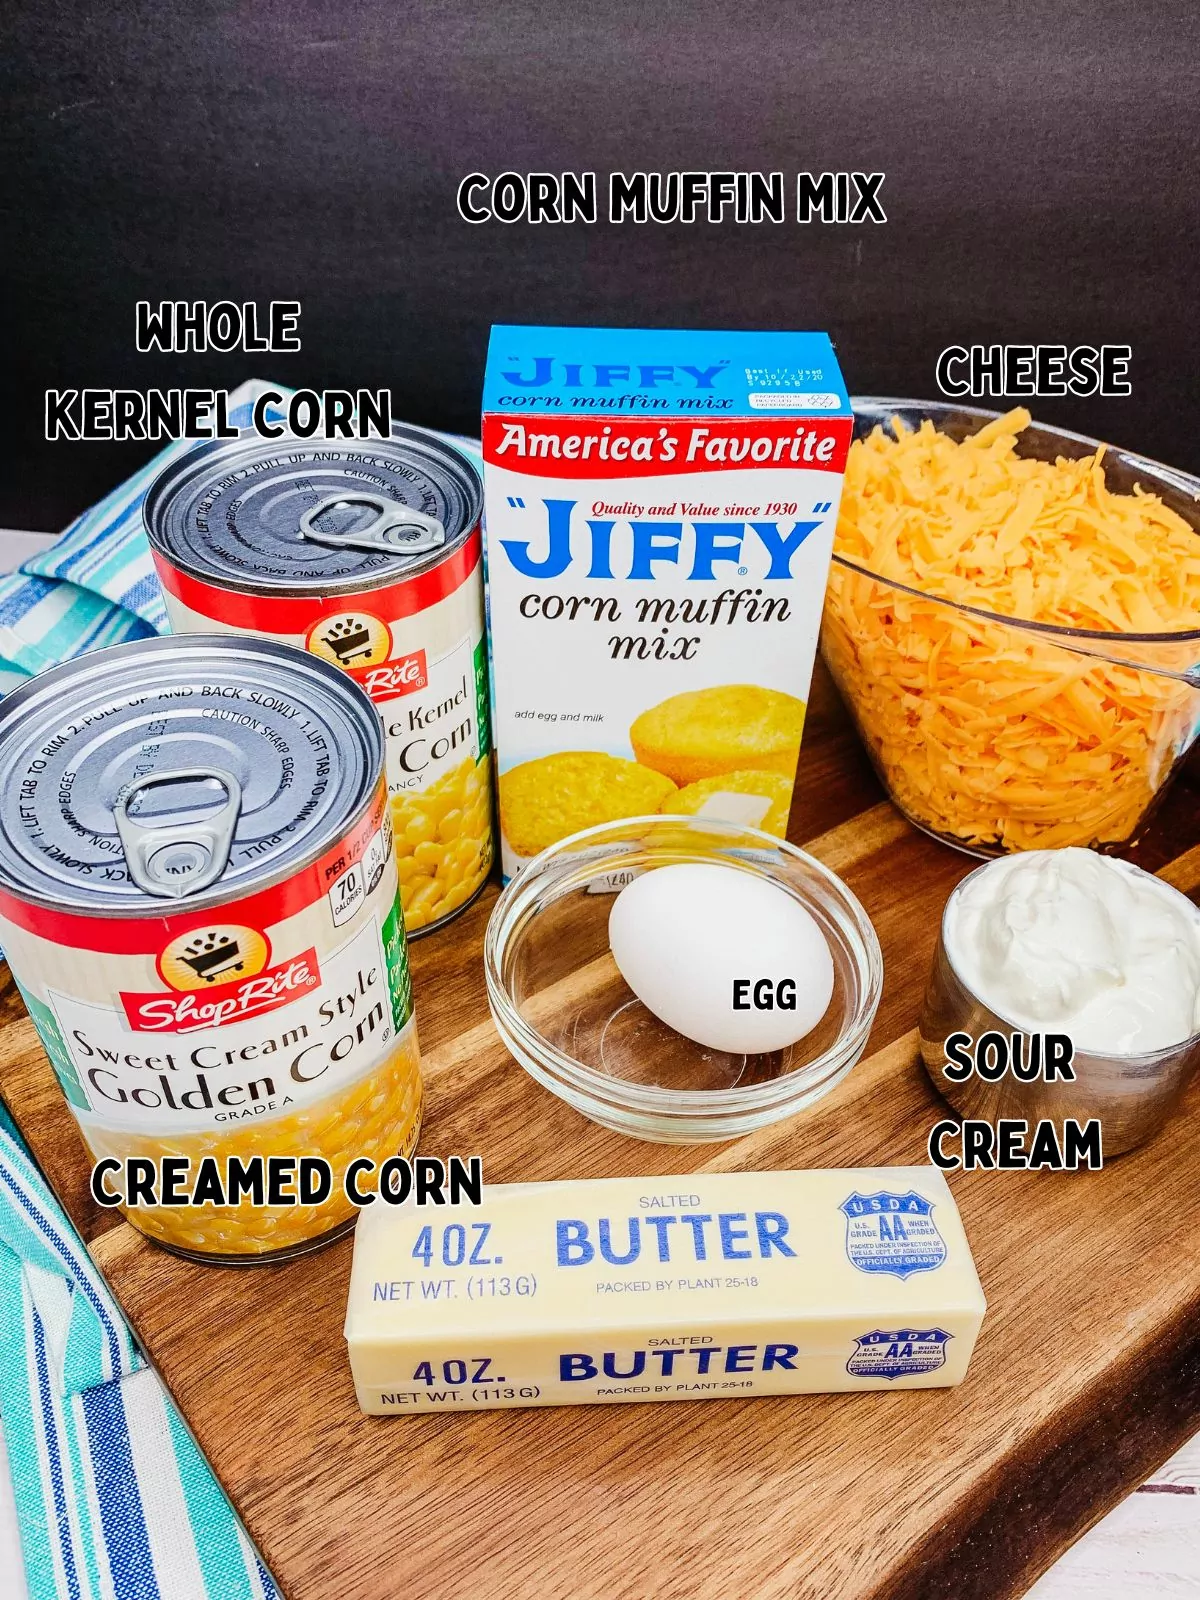 Ingredients for Corn Pudding Casserole.